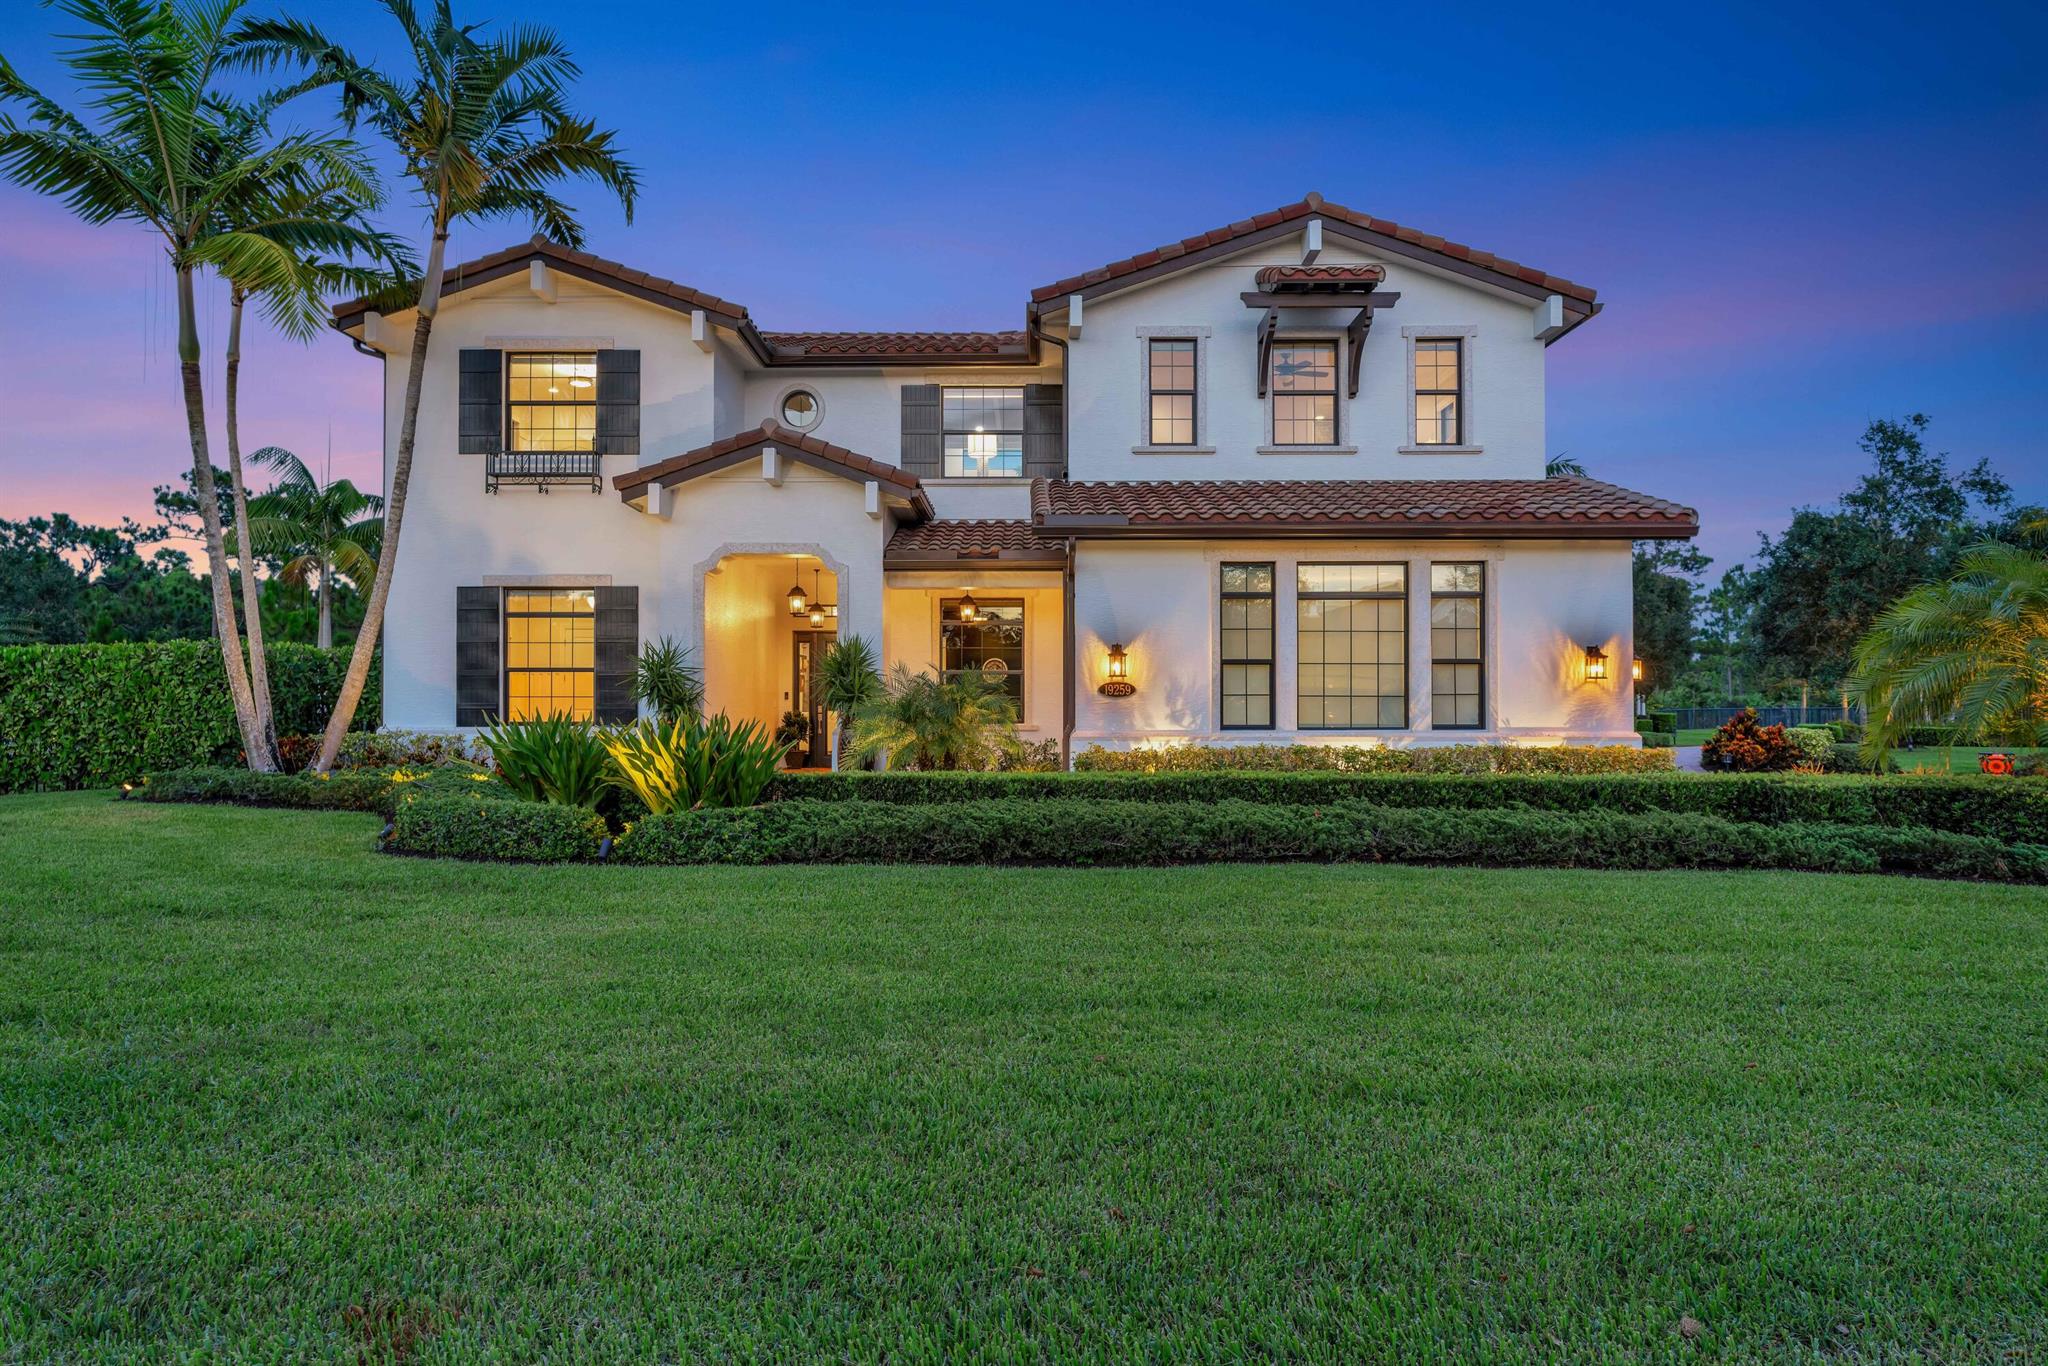 Introducing a once-in-a-lifetime opportunity! Step into the lap of luxury with this exquisite Mediterranean-style masterpiece nestled in the prestigious Prado community of Jupiter. Experience the ultimate in convenience with easy access to beaches, golf courses, shopping, and major highways like I-95 and the Florida Turnpike.Situated on a sprawling 1.1 acre lot, this home offers unparalleled privacy thanks to its prime location next to the tranquil Pennock Preserve. Surrounded by lush, tropical landscaping, you'll feel like you've stepped into your own private paradise. The stunning award-winning LED-lit pool serves as the centerpiece of the outdoor oasis, featuring multiple levels, a lap lane, fountains, overflowing urns, and a luxurious hot tub. Relax and entertain in style on the travertine paver patio, complete with a cozy firepit, comfortable lounge furniture, and a brand-new outdoor kitchen &amp; bar. Perfect for hosting gatherings with loved ones, this is truly your "forever home." Adjacent to the pool, you'll find a charming octagonal smokehouse gazebo, adding a touch of elegance to your outdoor living space.

The side yard is oriented around a "signature" Sylvester palm which is centered behind a brand new Har-tru bocce ball court and fronts a grove of tropical fruit trees.
 
When you step inside this impressive 5-bedroom, 5-1/2 bath home with a dedicated office, gourmet kitchen, bar &amp; den, billiard room, and screened porch you will immediately recognize the deep attention to detail throughout, with extensive millwork, high end appliances, top-of-the-line plumbing fixtures, a custom-built temperature &amp; humidity-controlled wine wall, coffered ceilings, and gleaming hardwood.  The massive first-floor primary bedroom features his &amp; her vanities and walk-in closets, a cavernous shower with an overhead rainwater showerhead system, and a luxurious soaking tub. Your continuous comfort is assured with a full-house Generac generator powered by an in-ground 500-gallon propane tank.

Don't miss out on this unique opportunity to own a piece of paradise. Make this dream home yours!